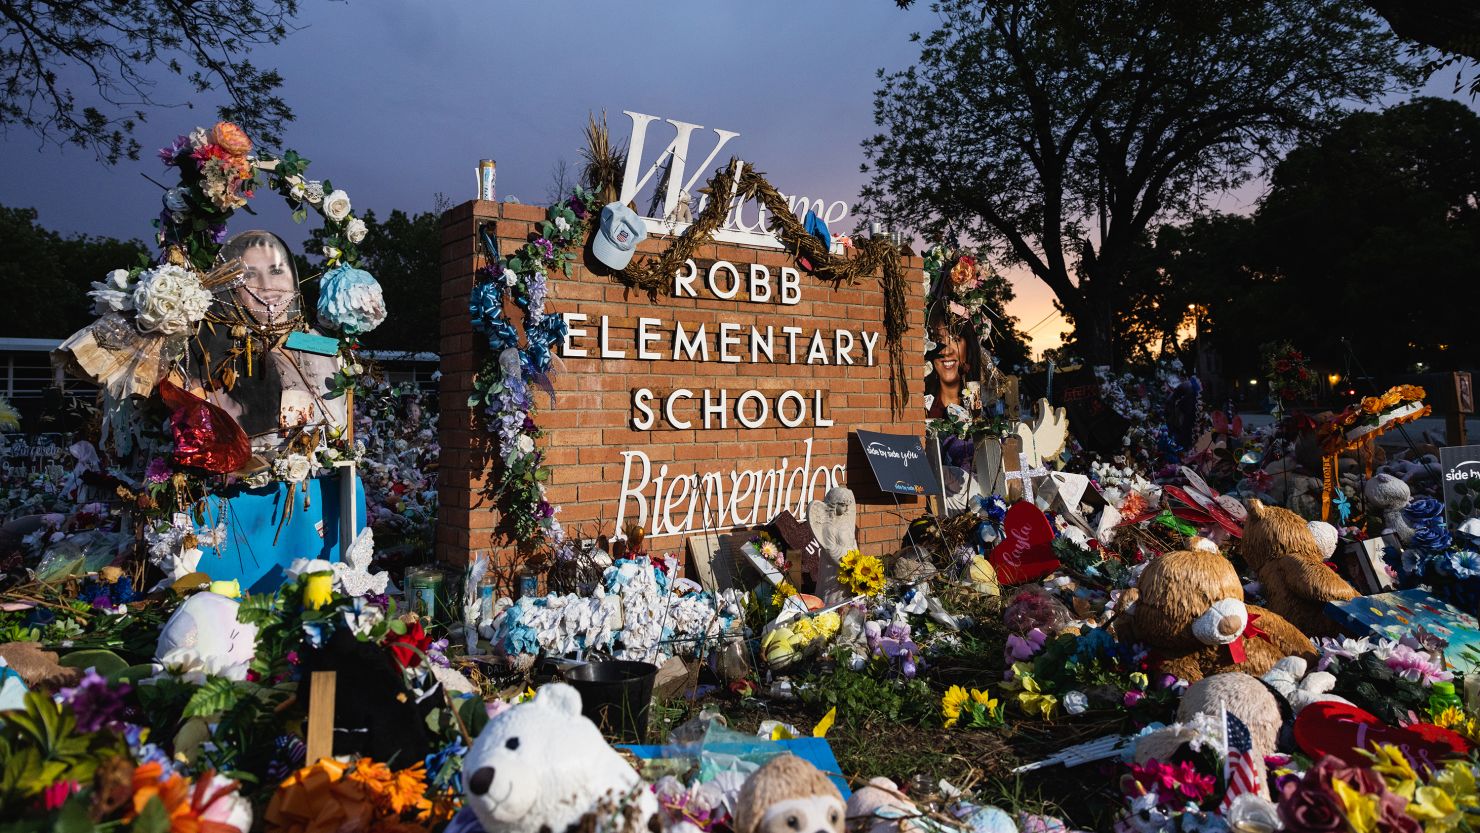 The sun sets behind the memorial for the victims of the massacre at Robb Elementary School in Uvalde, Texas, in August 2022.